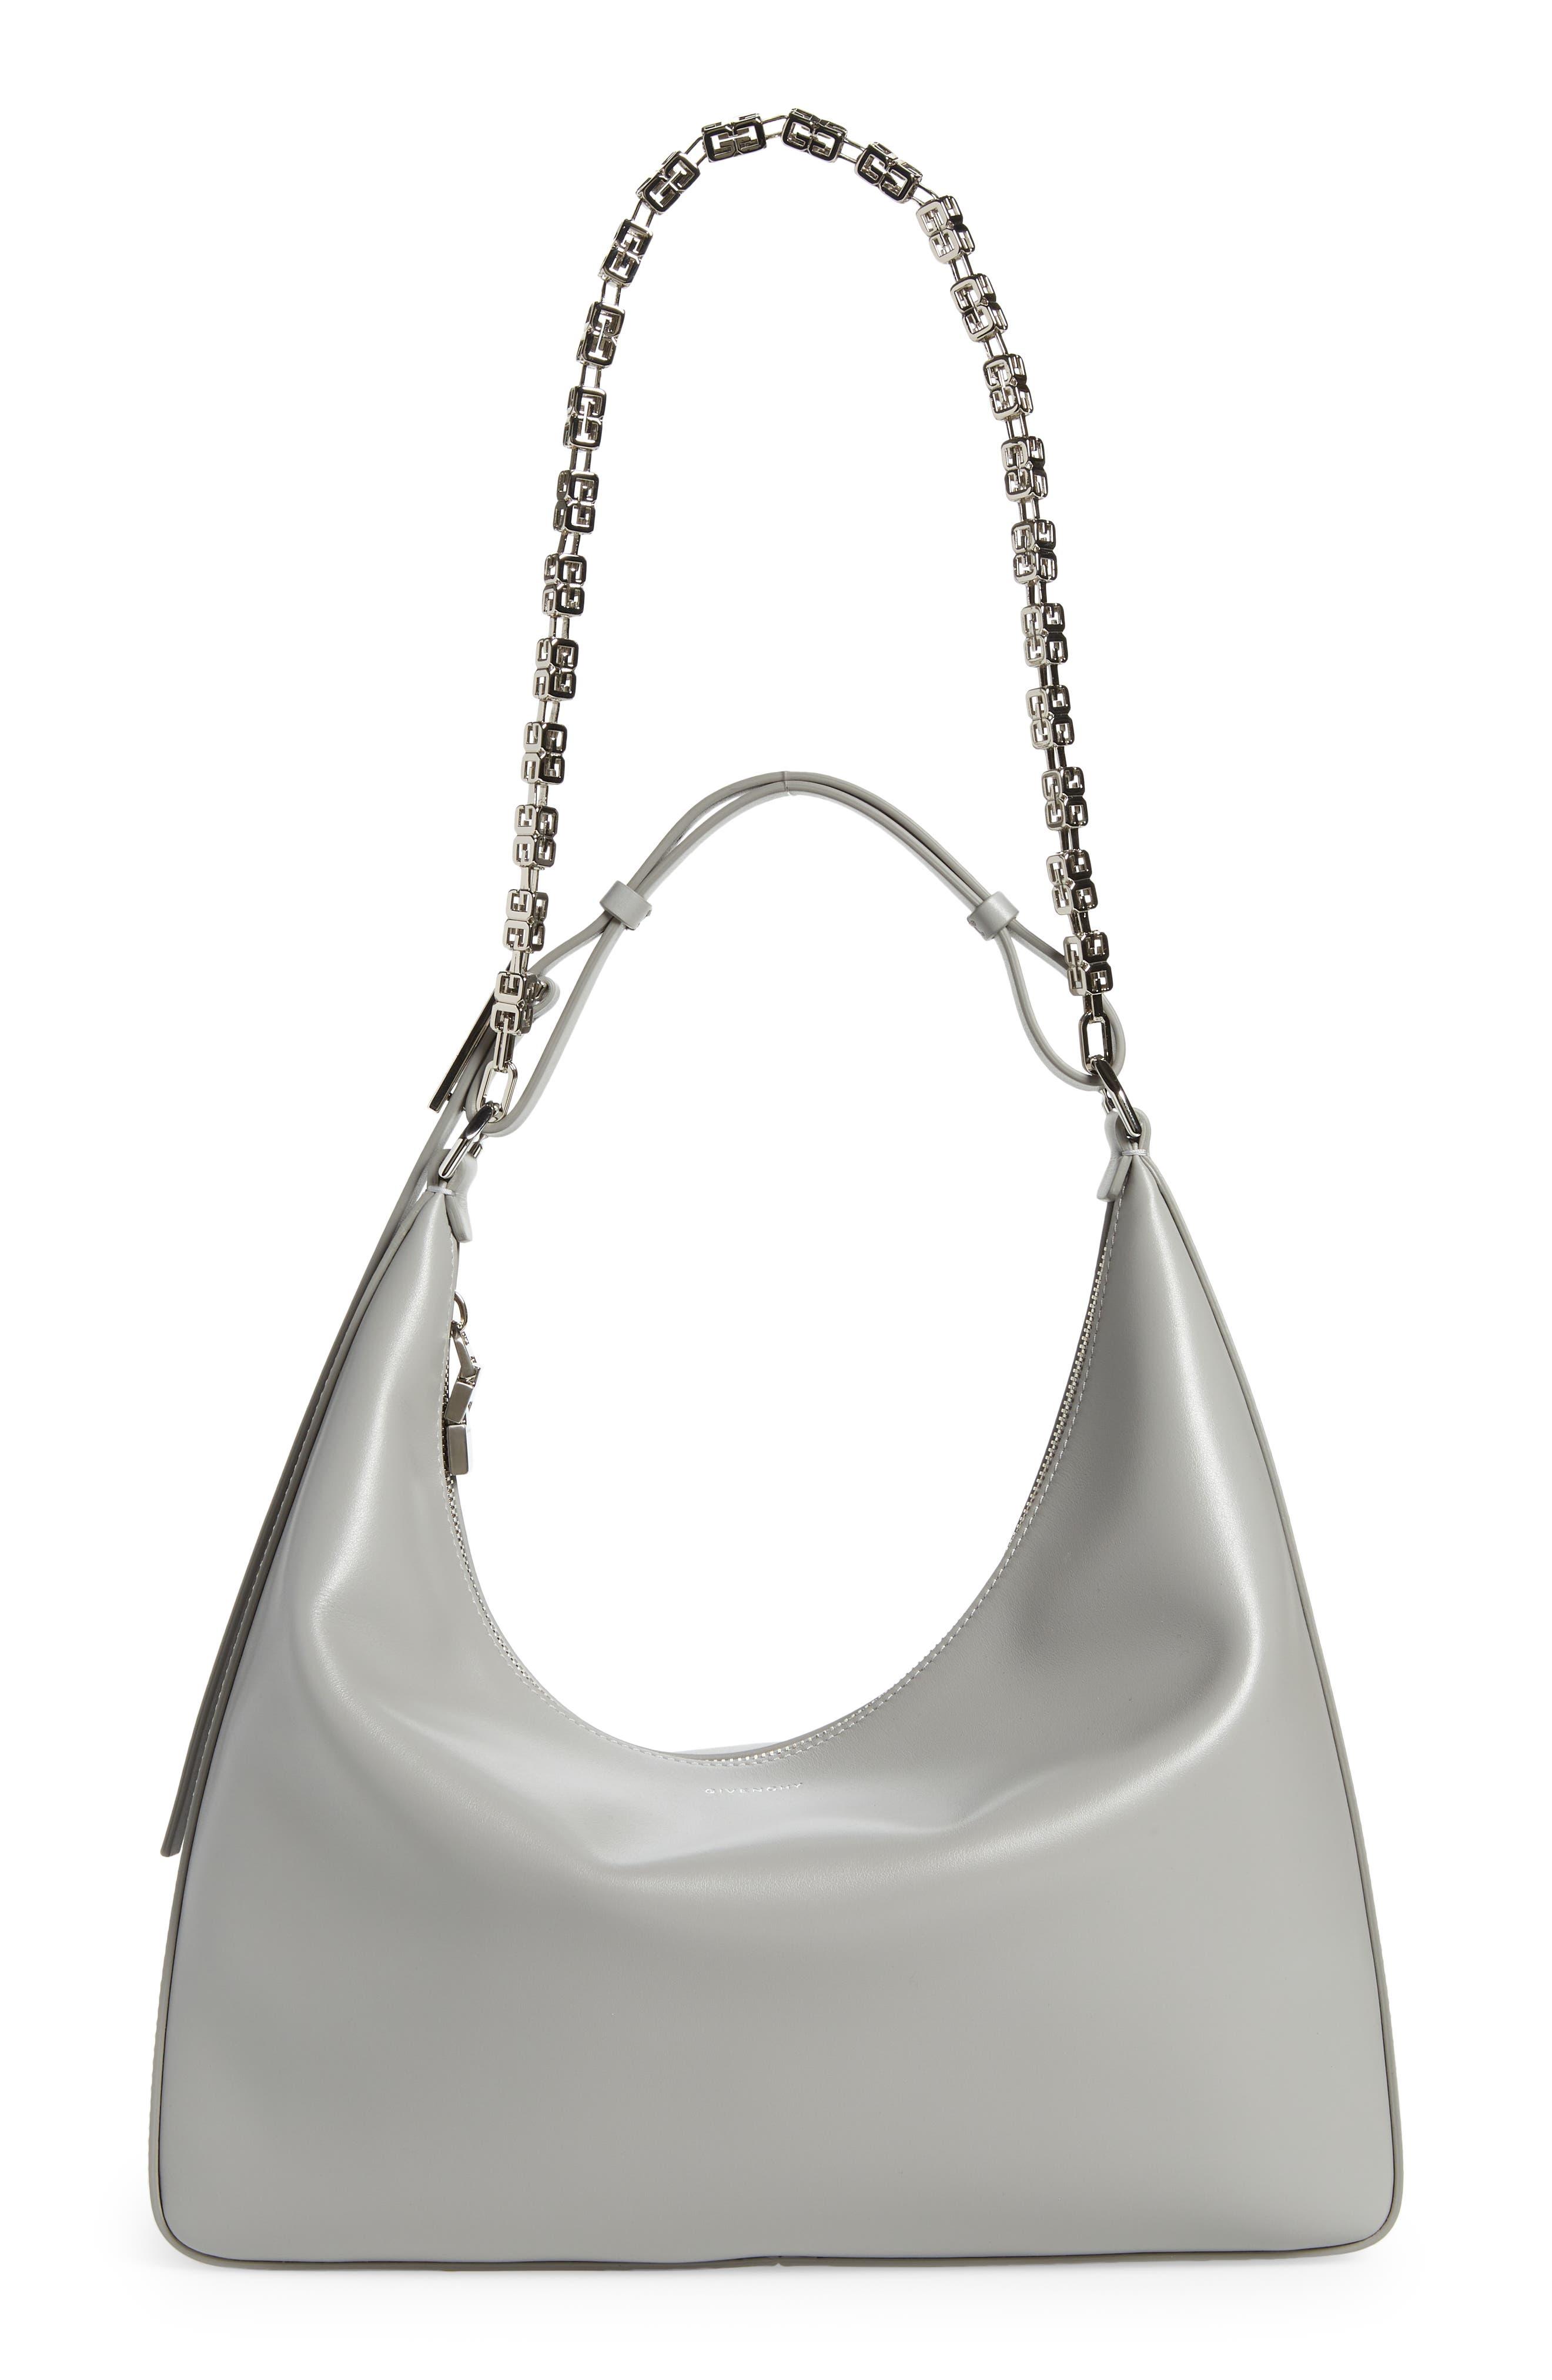 Givenchy Small Moon Cut Out Leather Hobo Bag in Gray | Lyst